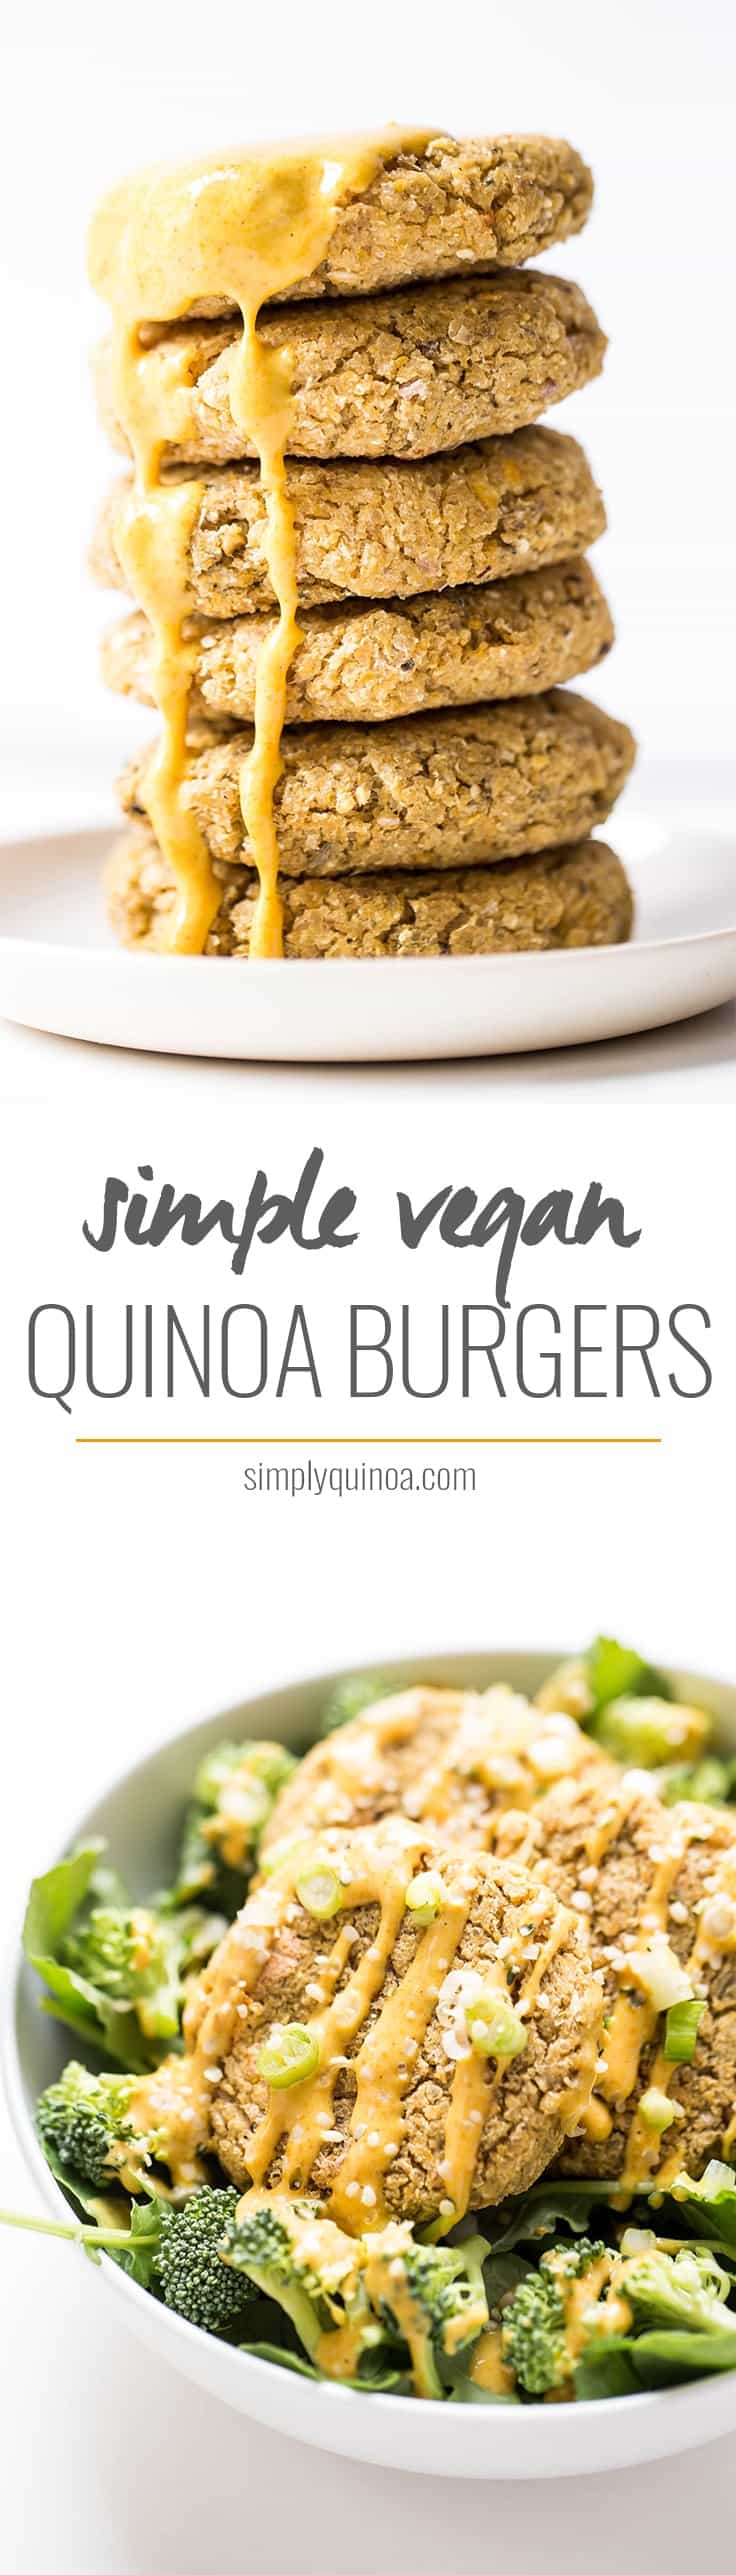 These epic VEGAN quinoa burgers are so simple to make, taste awesome and are the perfect topping on salad!